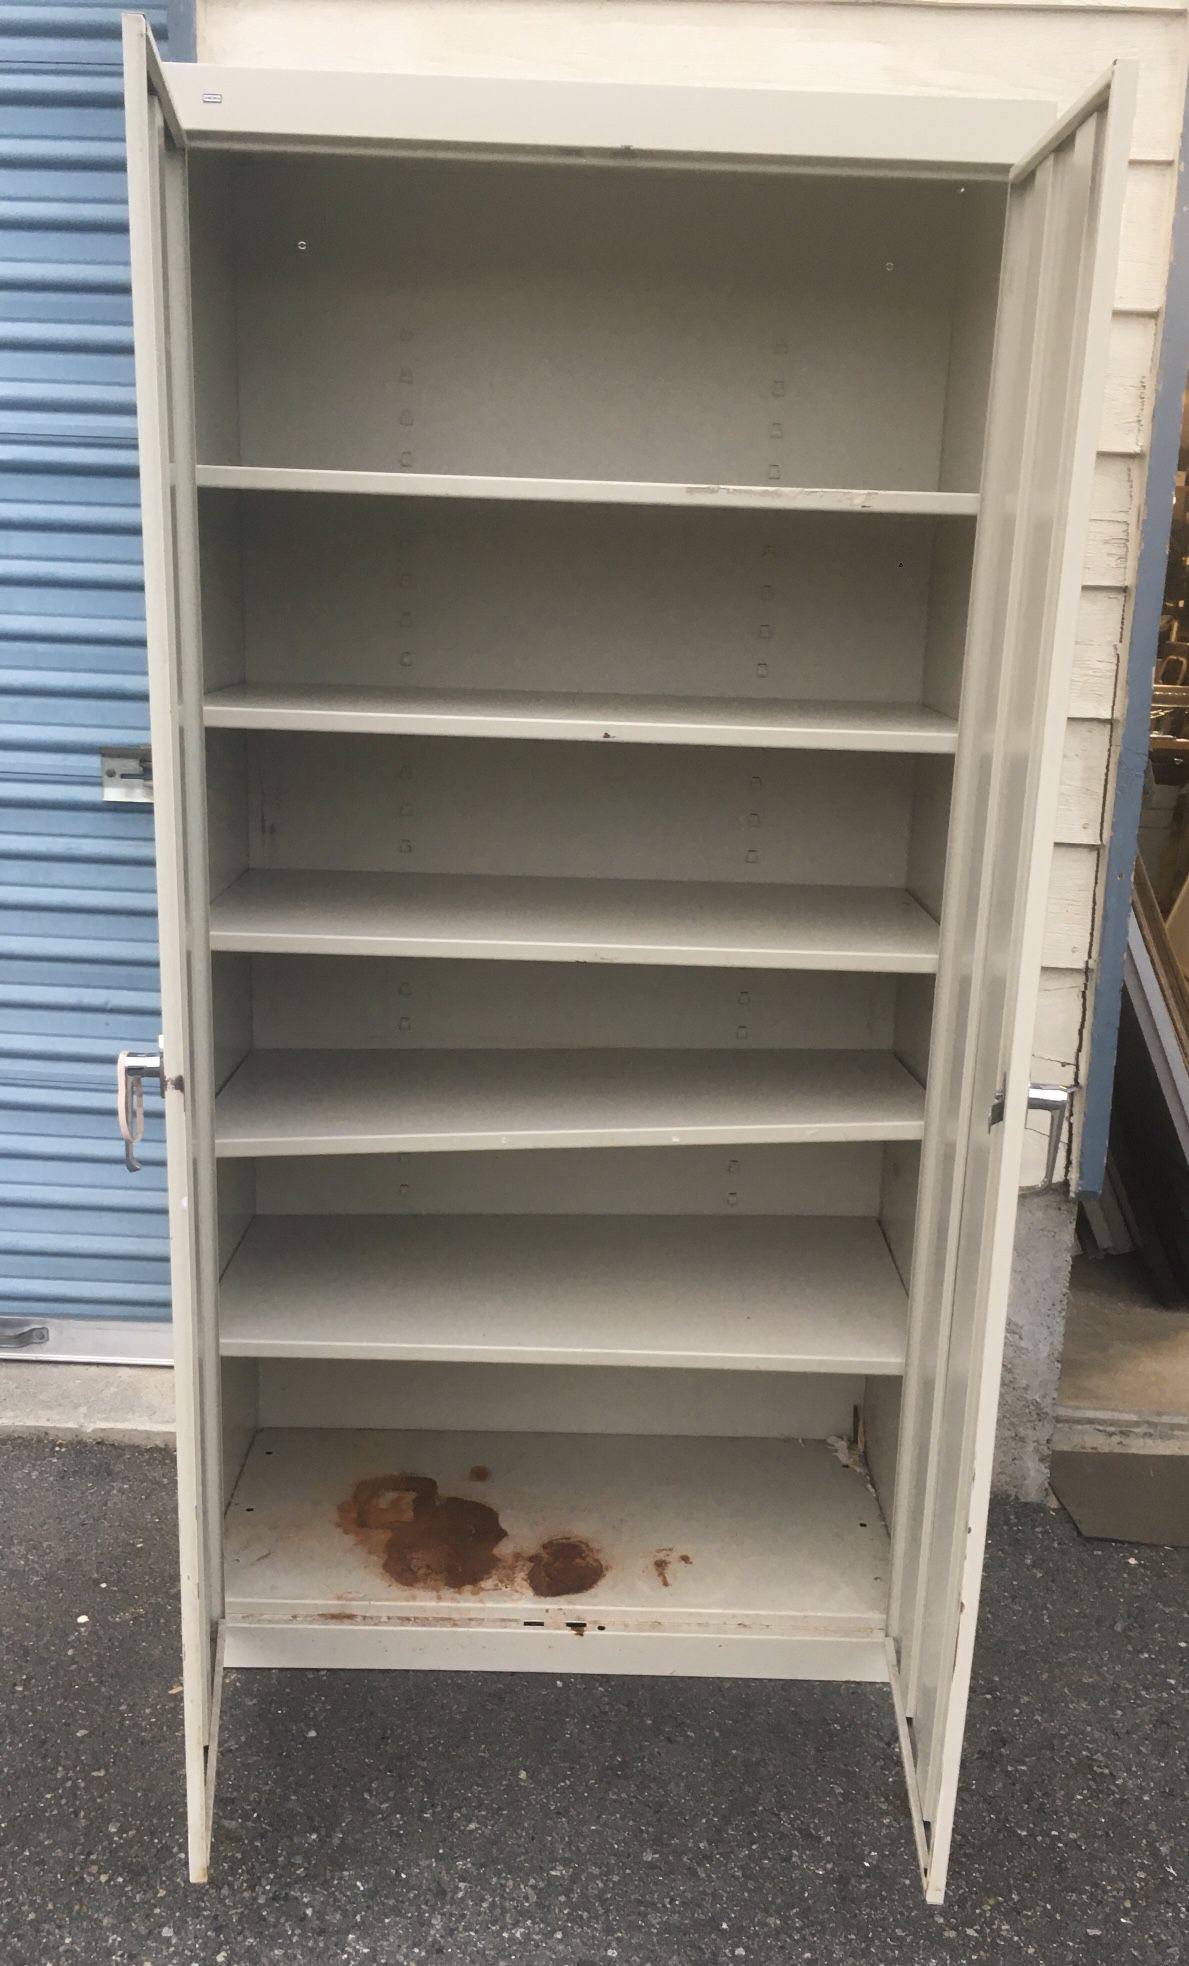 Crafting Cabinet for Sale in Snohomish, WA - OfferUp